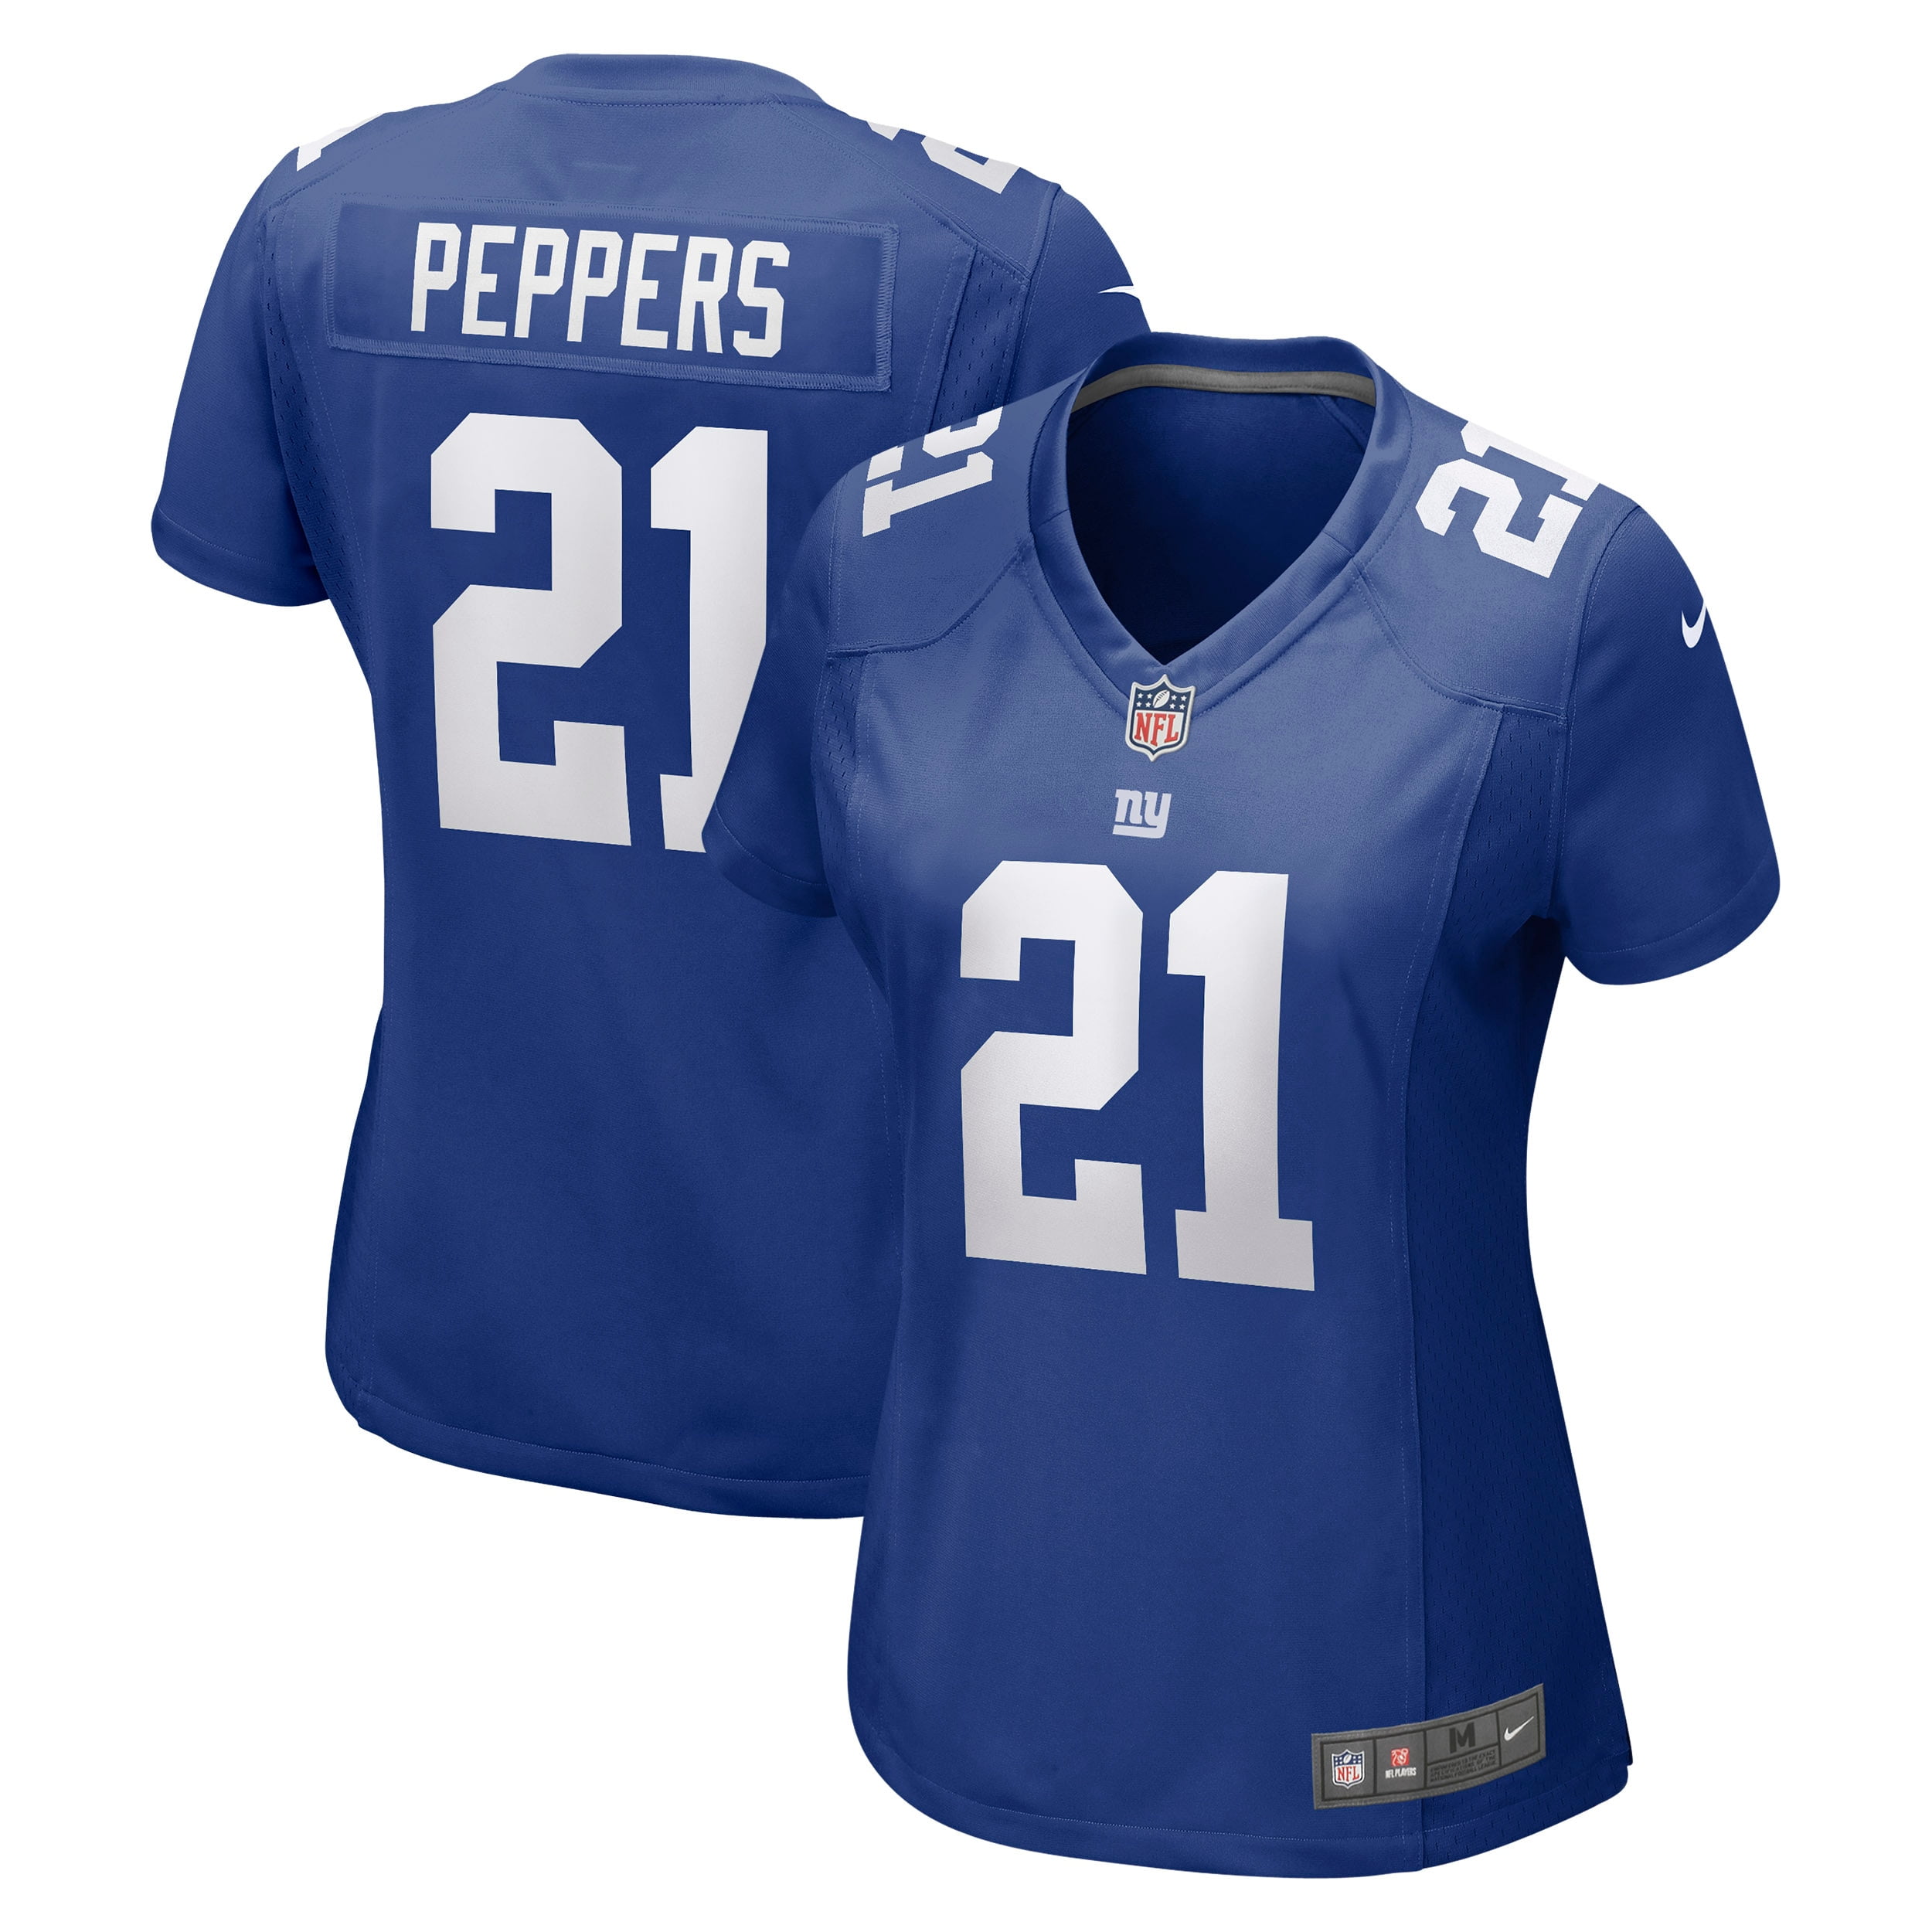 jabrill peppers giants jersey